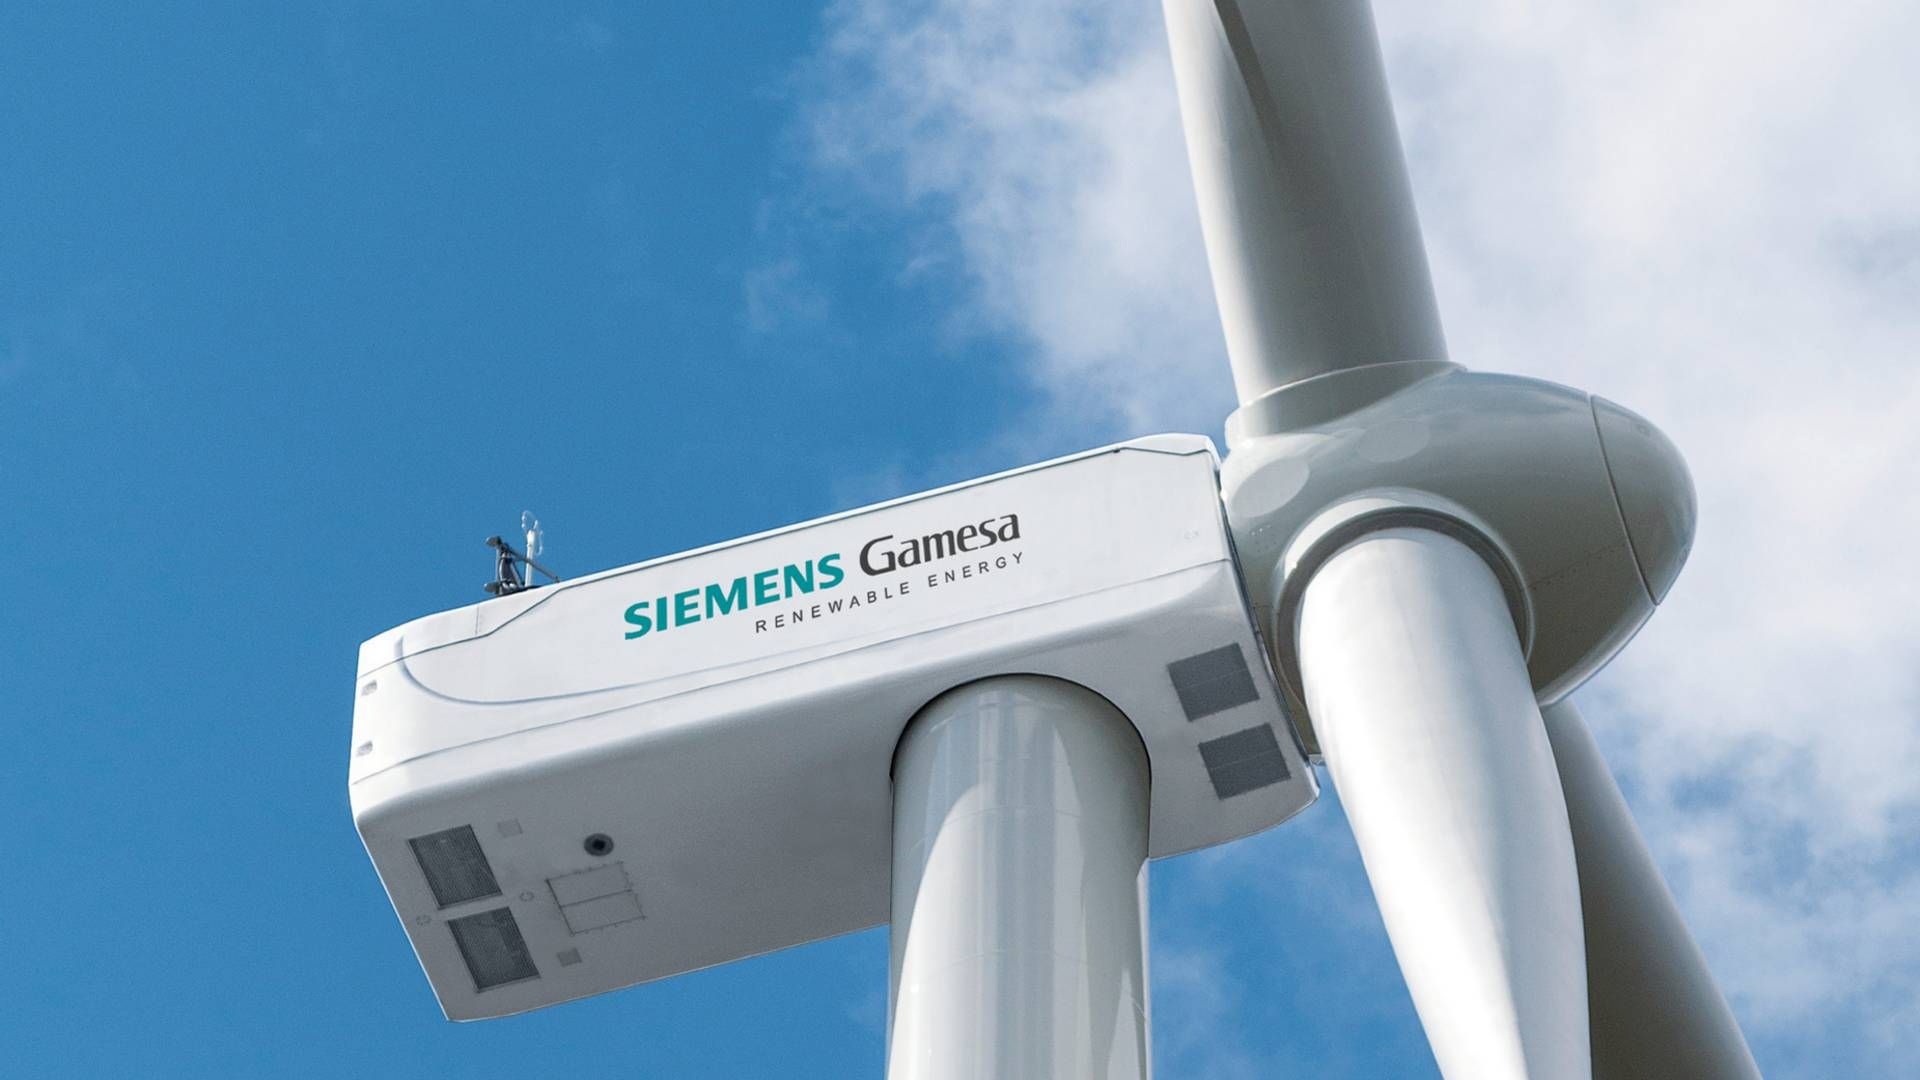 Siemens Gamesa's 3.X turbine is the largest model entailed by the new deal. Machines rated as low as 650kW will be overhauled in the coming years. | Photo: Siemens Gamesa/Marina Pacheco